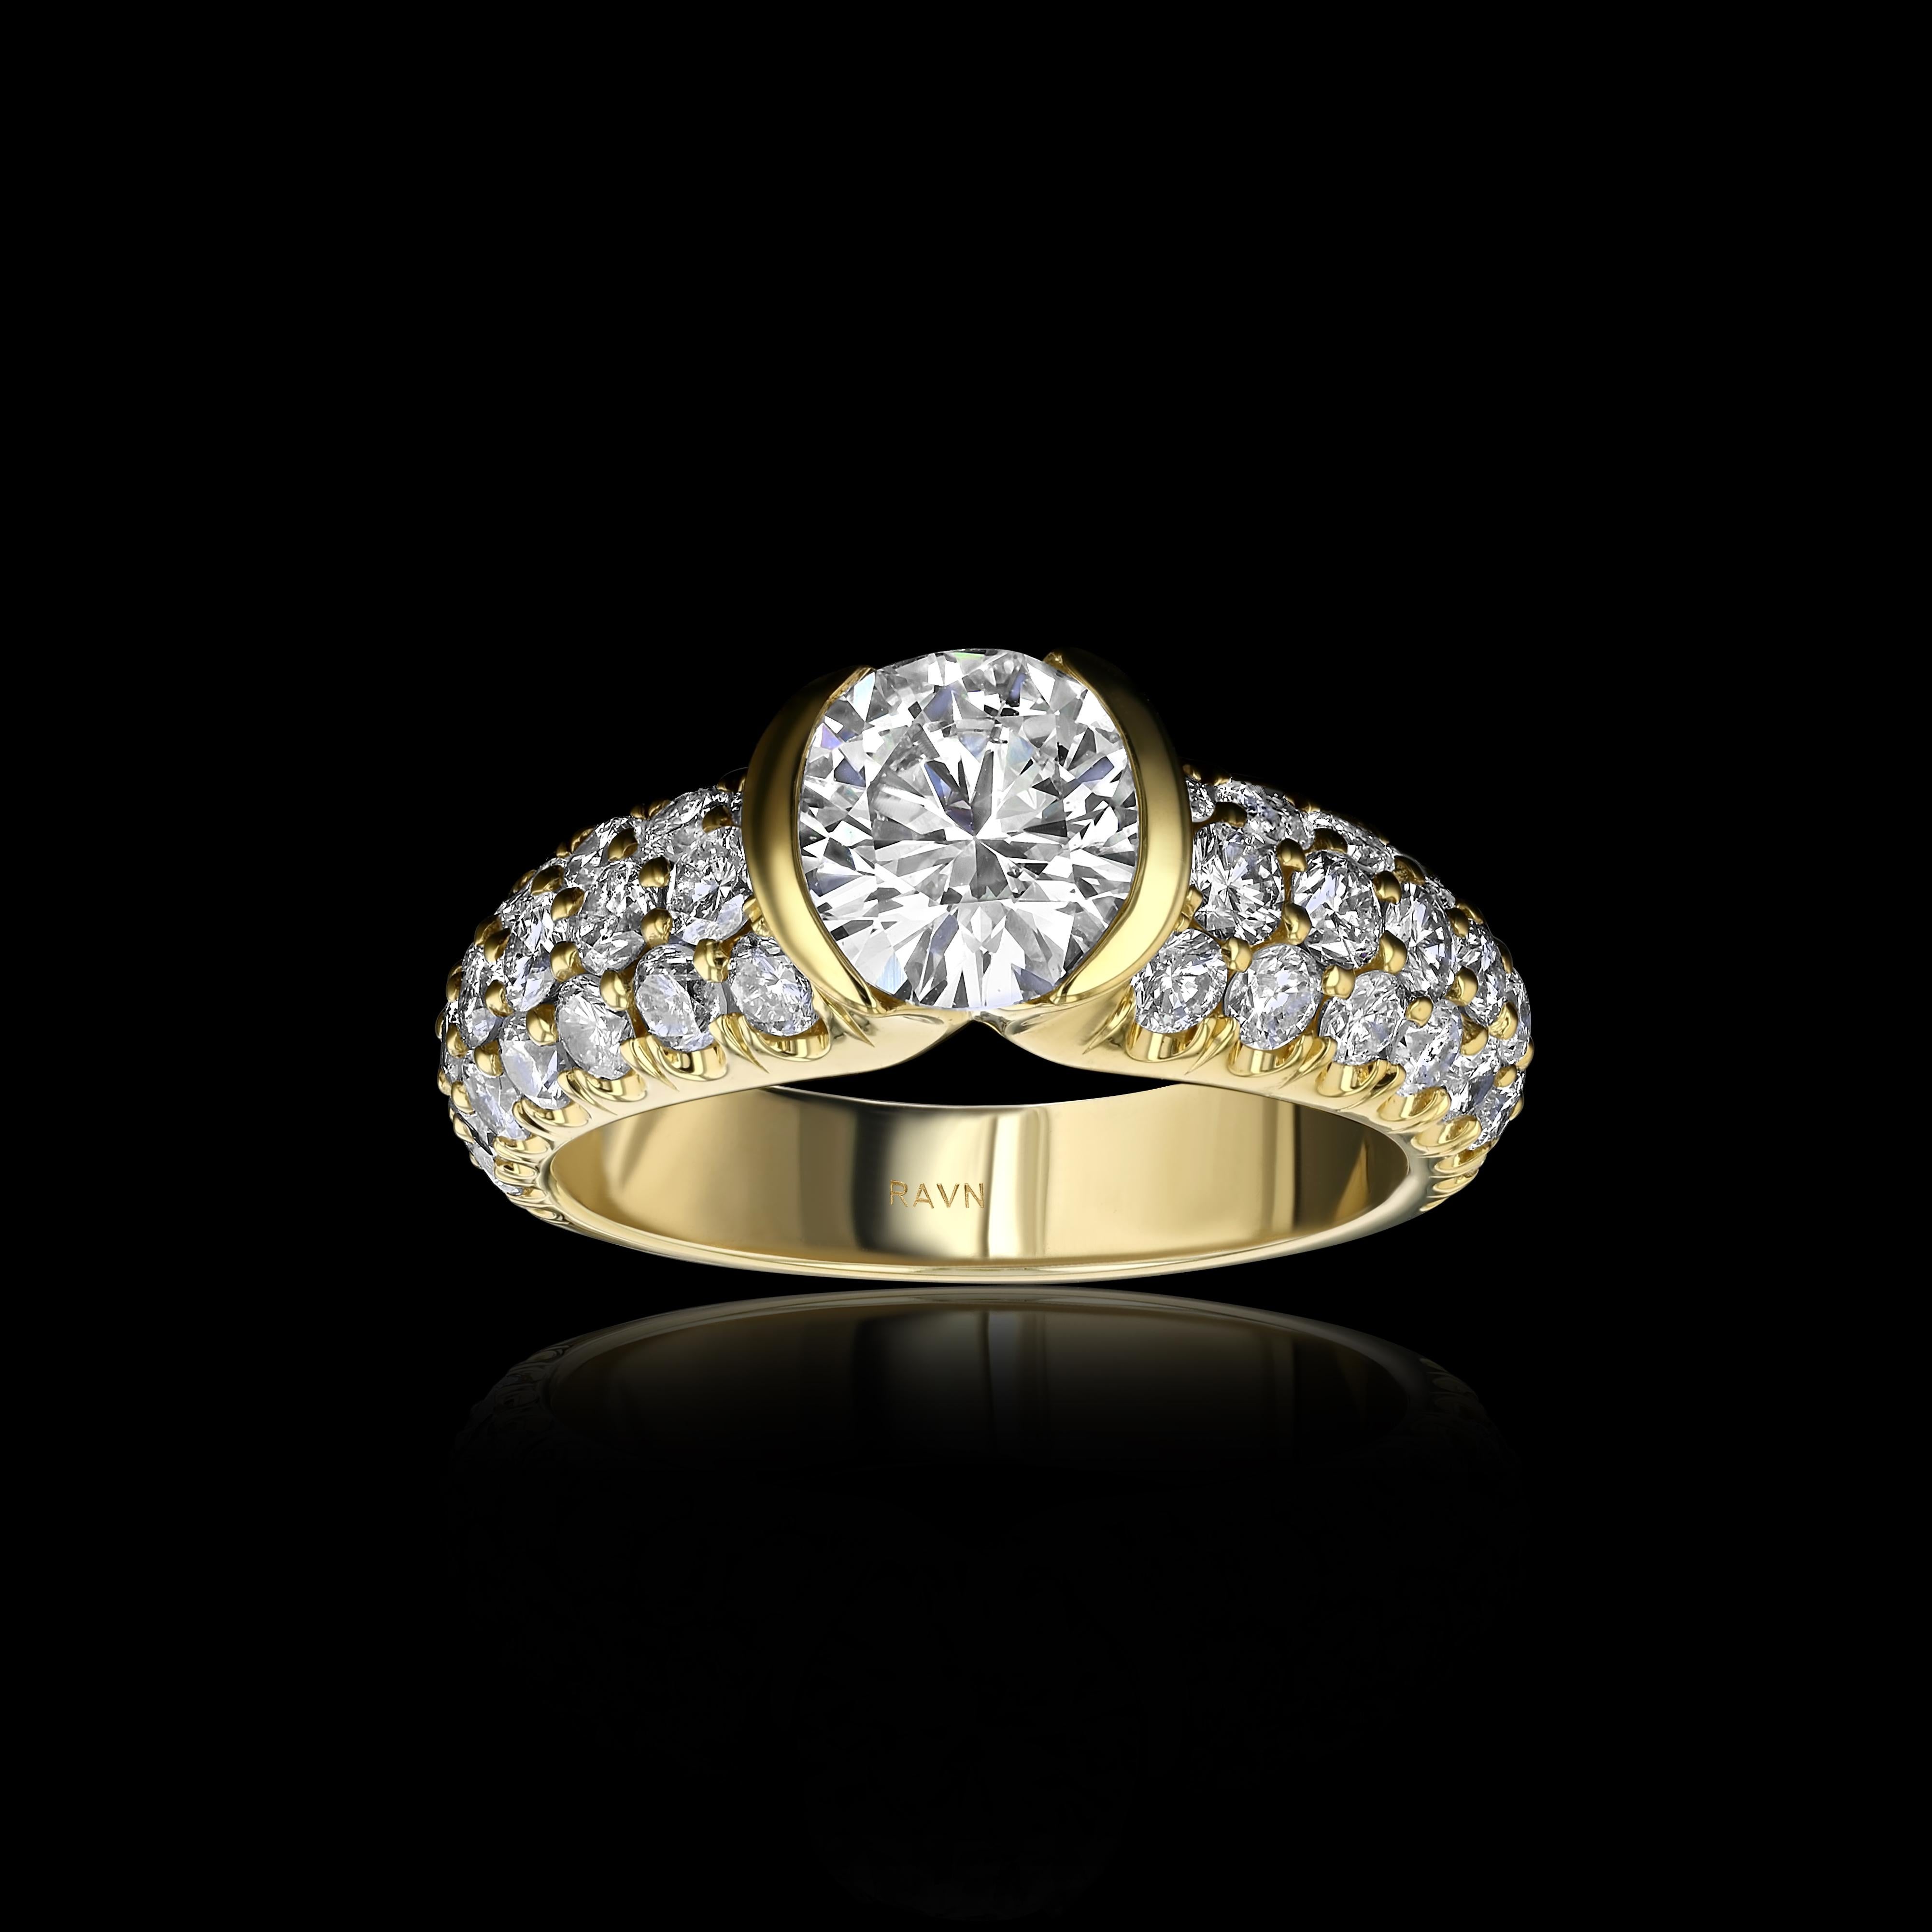 For Sale:  House of RAVN, Signature Old World Inspired Engagement Ring, 1.69ct GIA Diamond 2